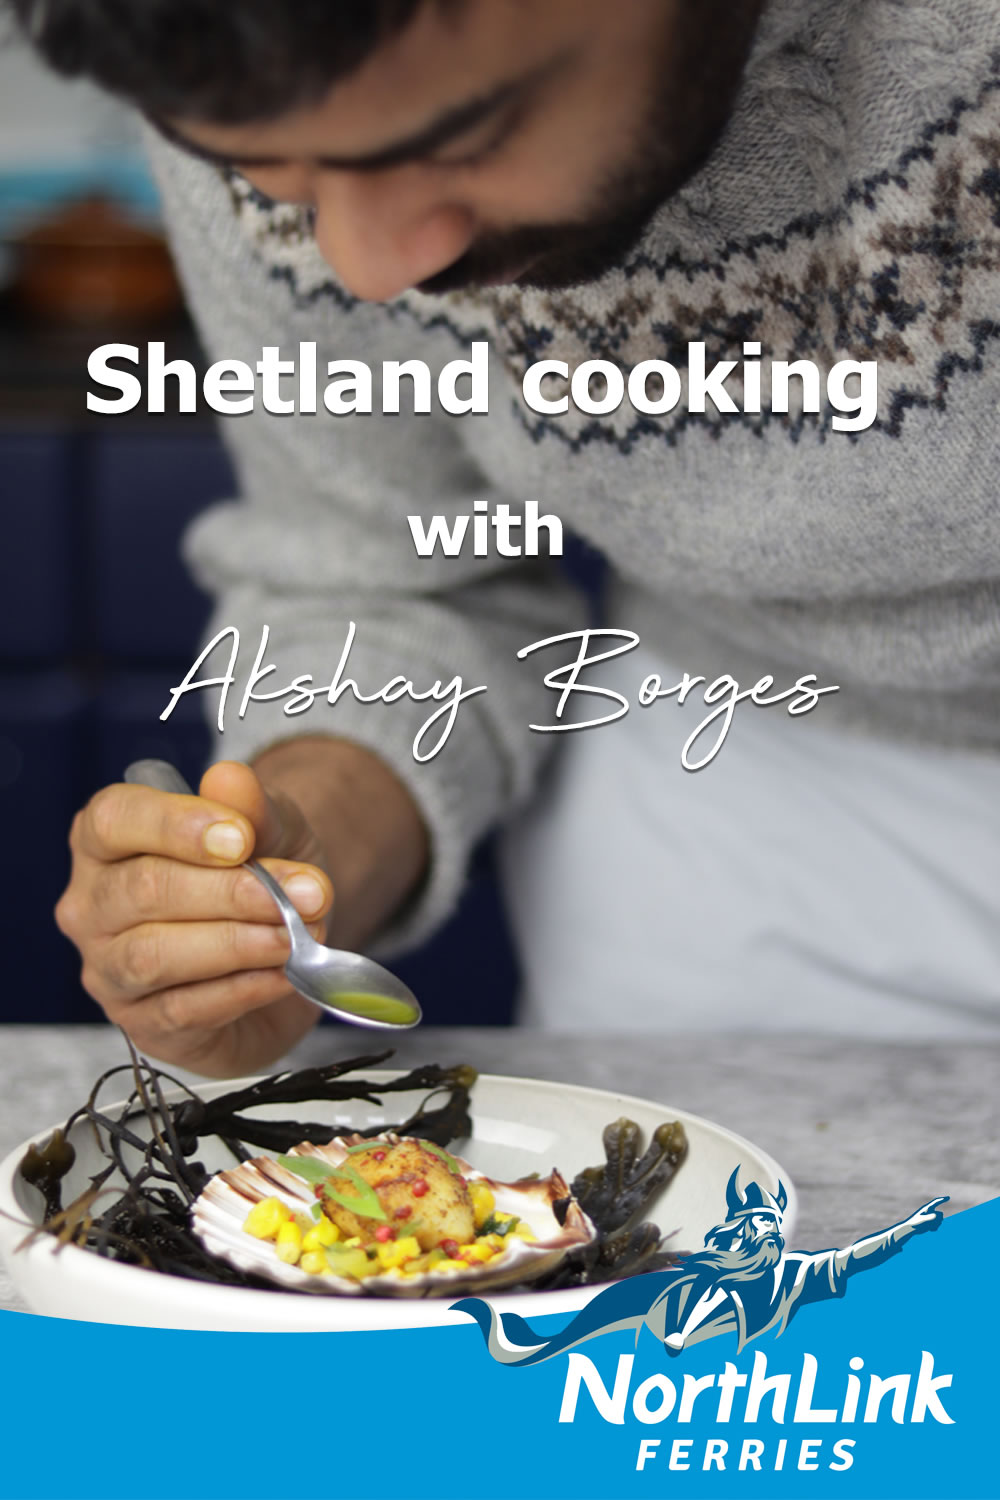 Shetland cooking with Akshay Borges